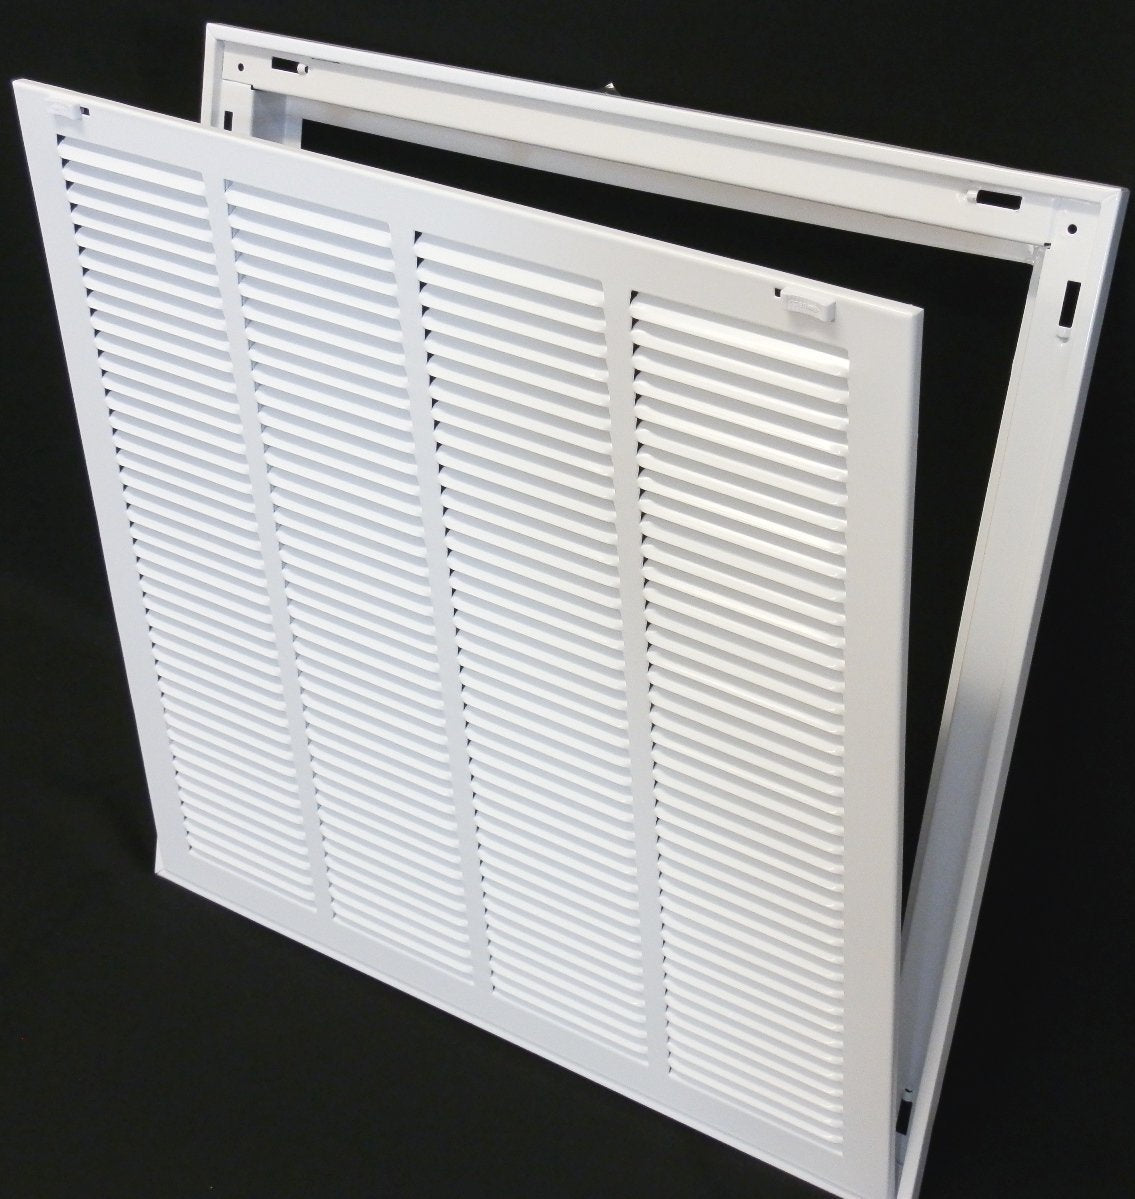 10&quot; X 34&quot; Steel Return Air Filter Grille for 1&quot; Filter - Removable Frame - [Outer Dimensions: 12 5/8&quot; X 36 5/8&quot;]